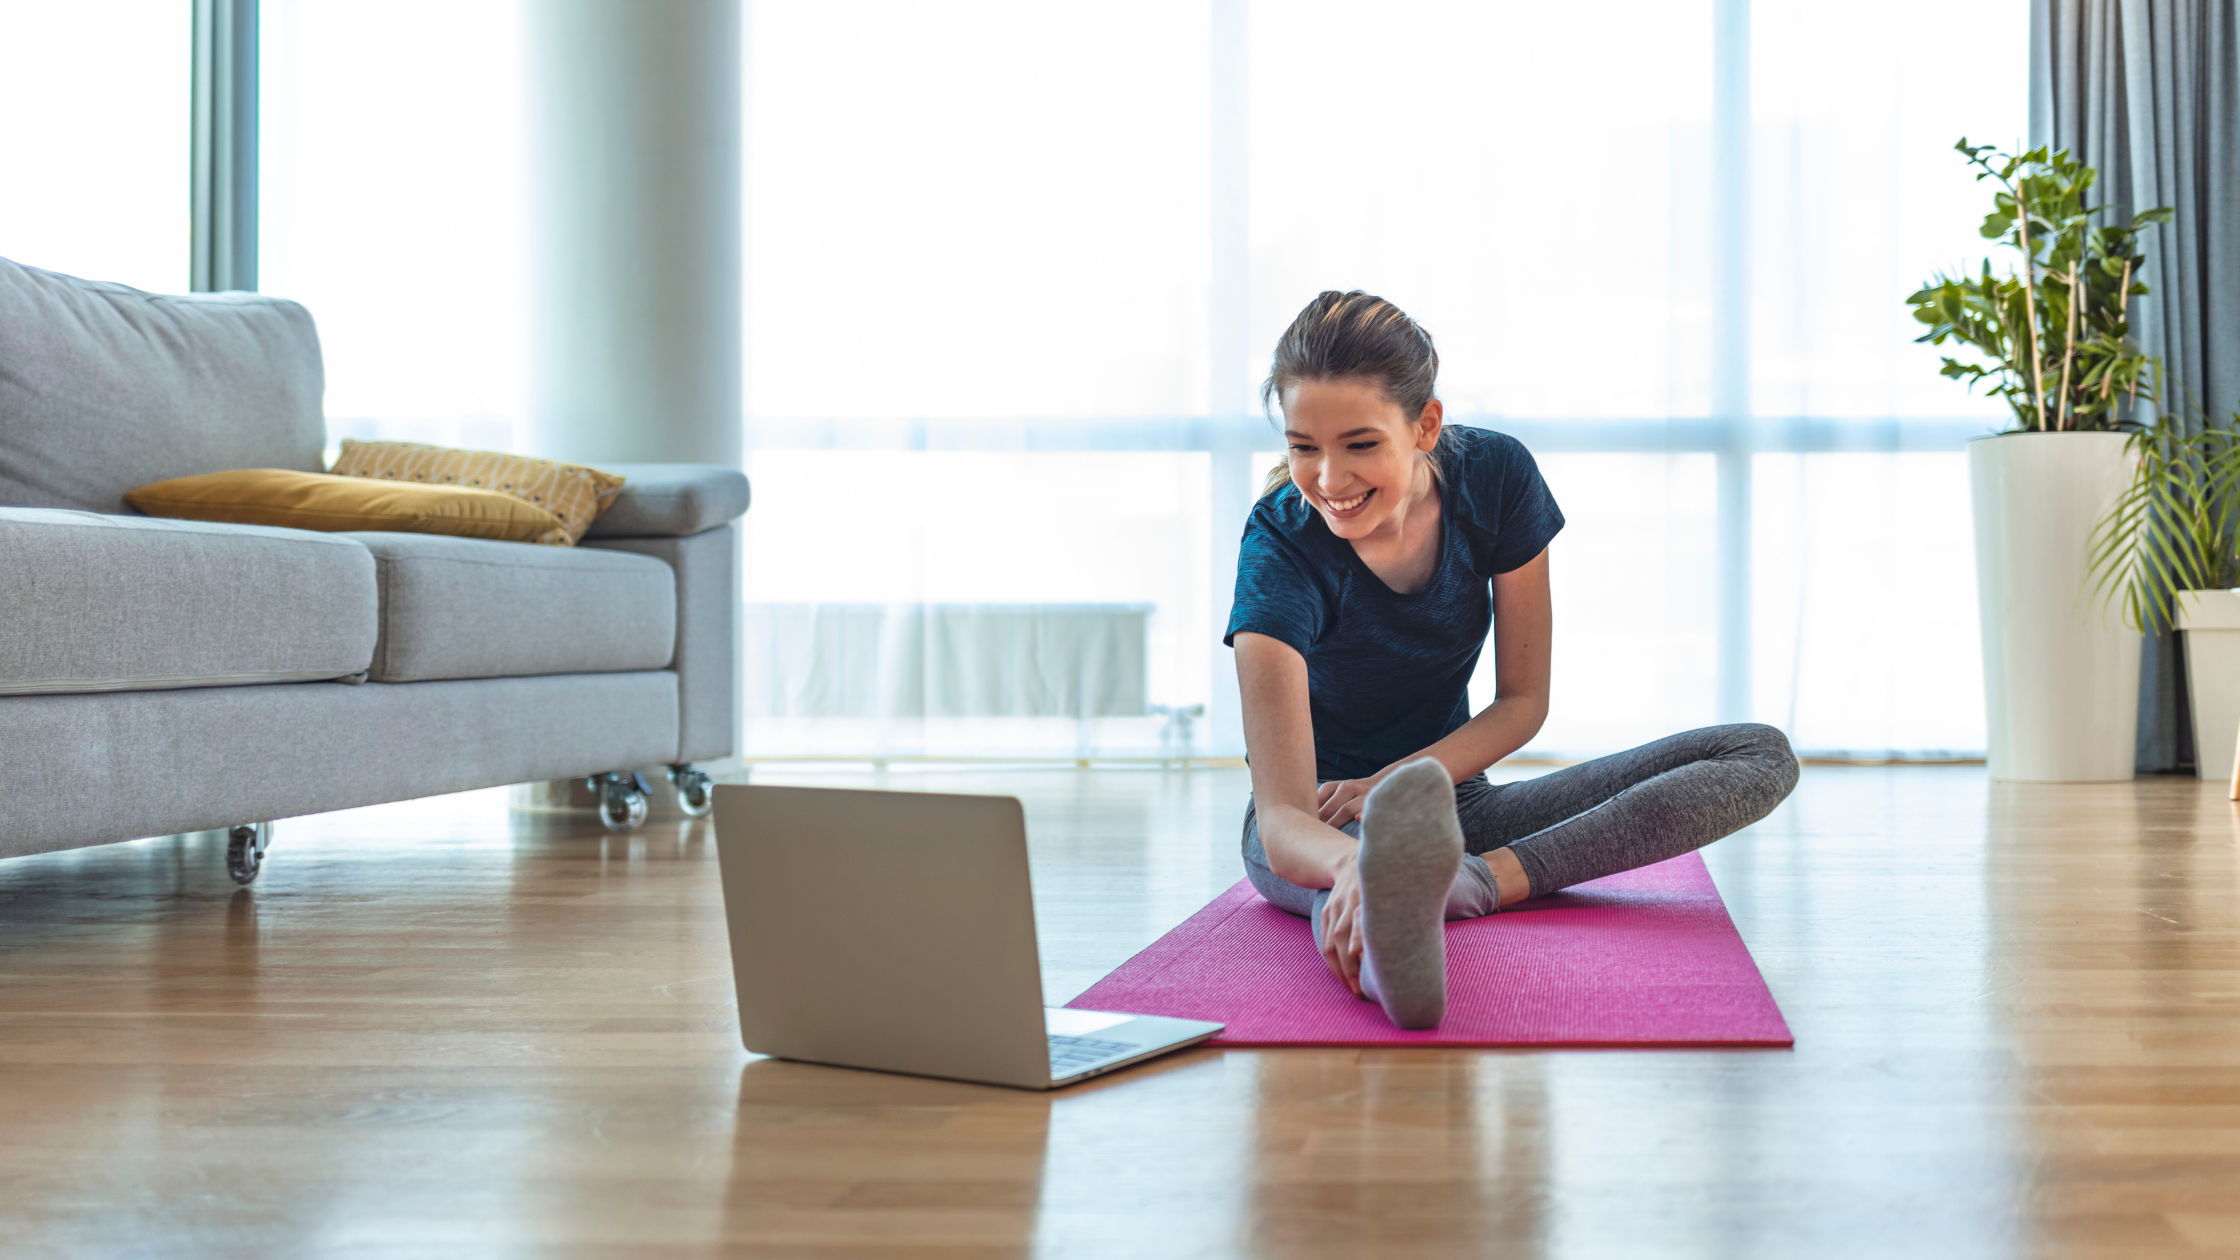 Woman smiling while working out at home on yoga mat